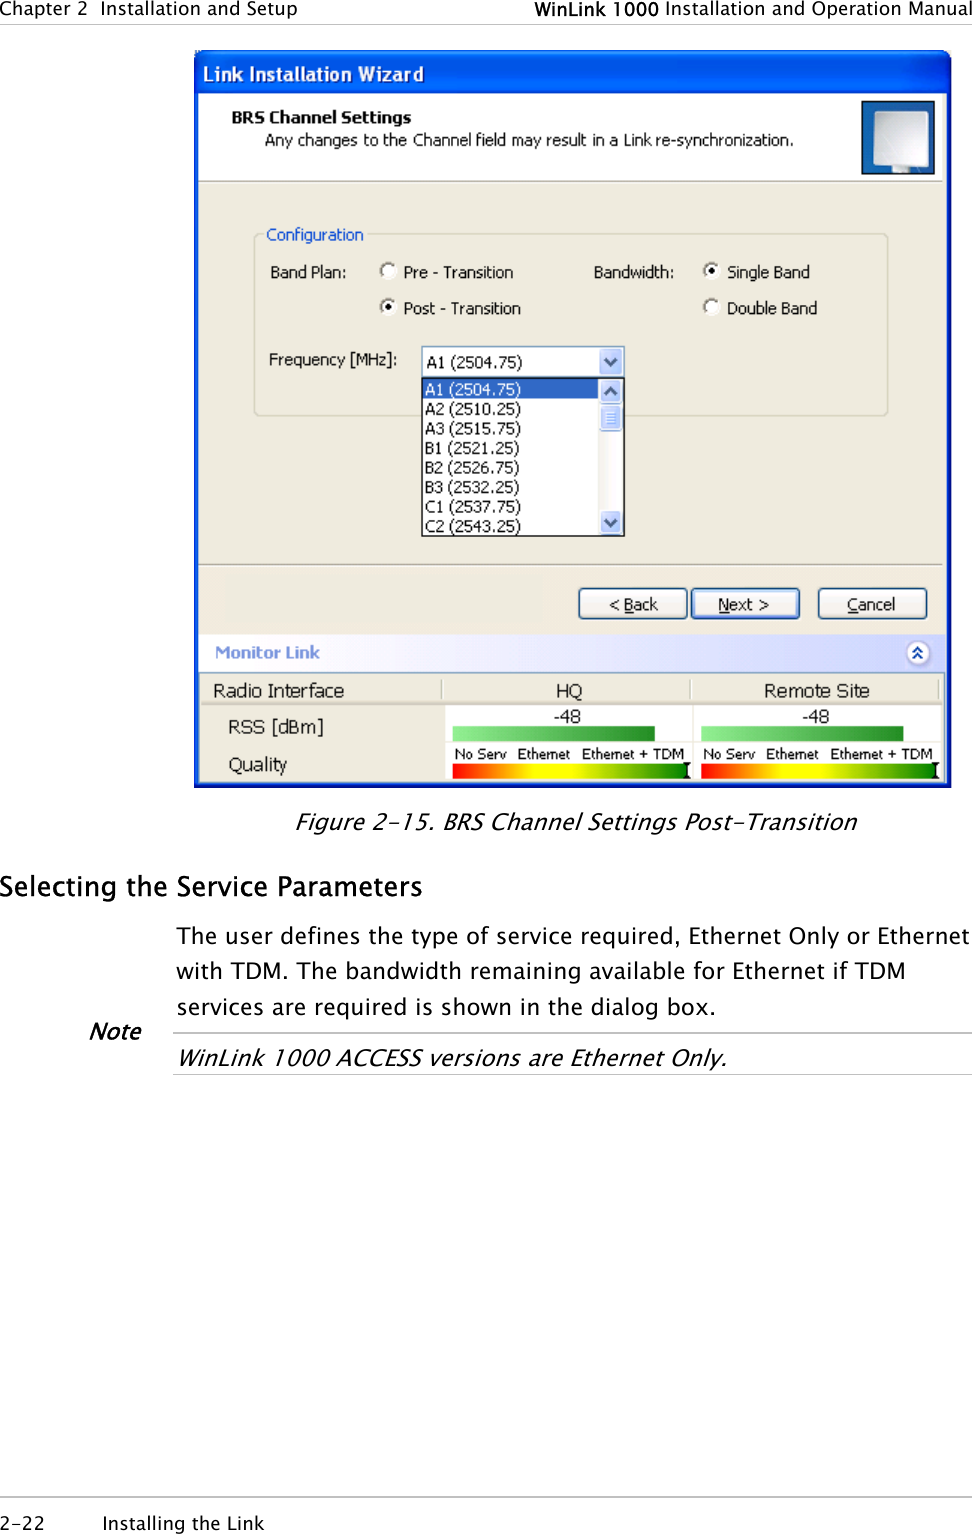 Chapter  2  Installation and Setup  WinLink 1000 Installation and Operation Manual  Figure  2-15. BRS Channel Settings Post-Transition Selecting the Service Parameters The user defines the type of service required, Ethernet Only or Ethernet with TDM. The bandwidth remaining available for Ethernet if TDM services are required is shown in the dialog box.   WinLink 1000 ACCESS versions are Ethernet Only.   Note 2-22 Installing the Link   